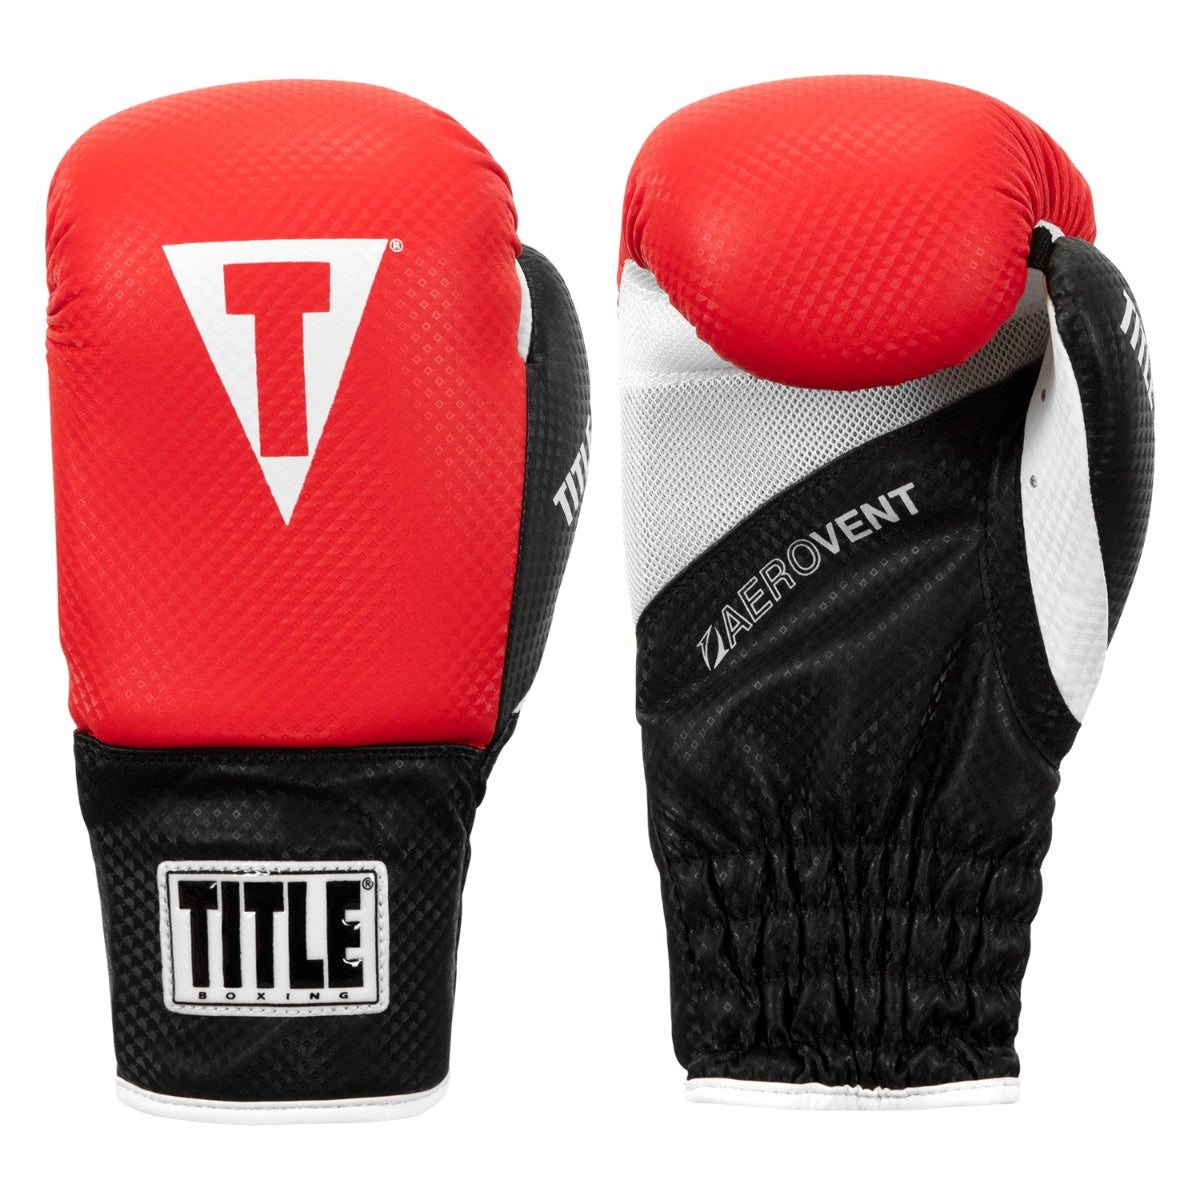 TITLE Aerovent Youth Boxing Gloves